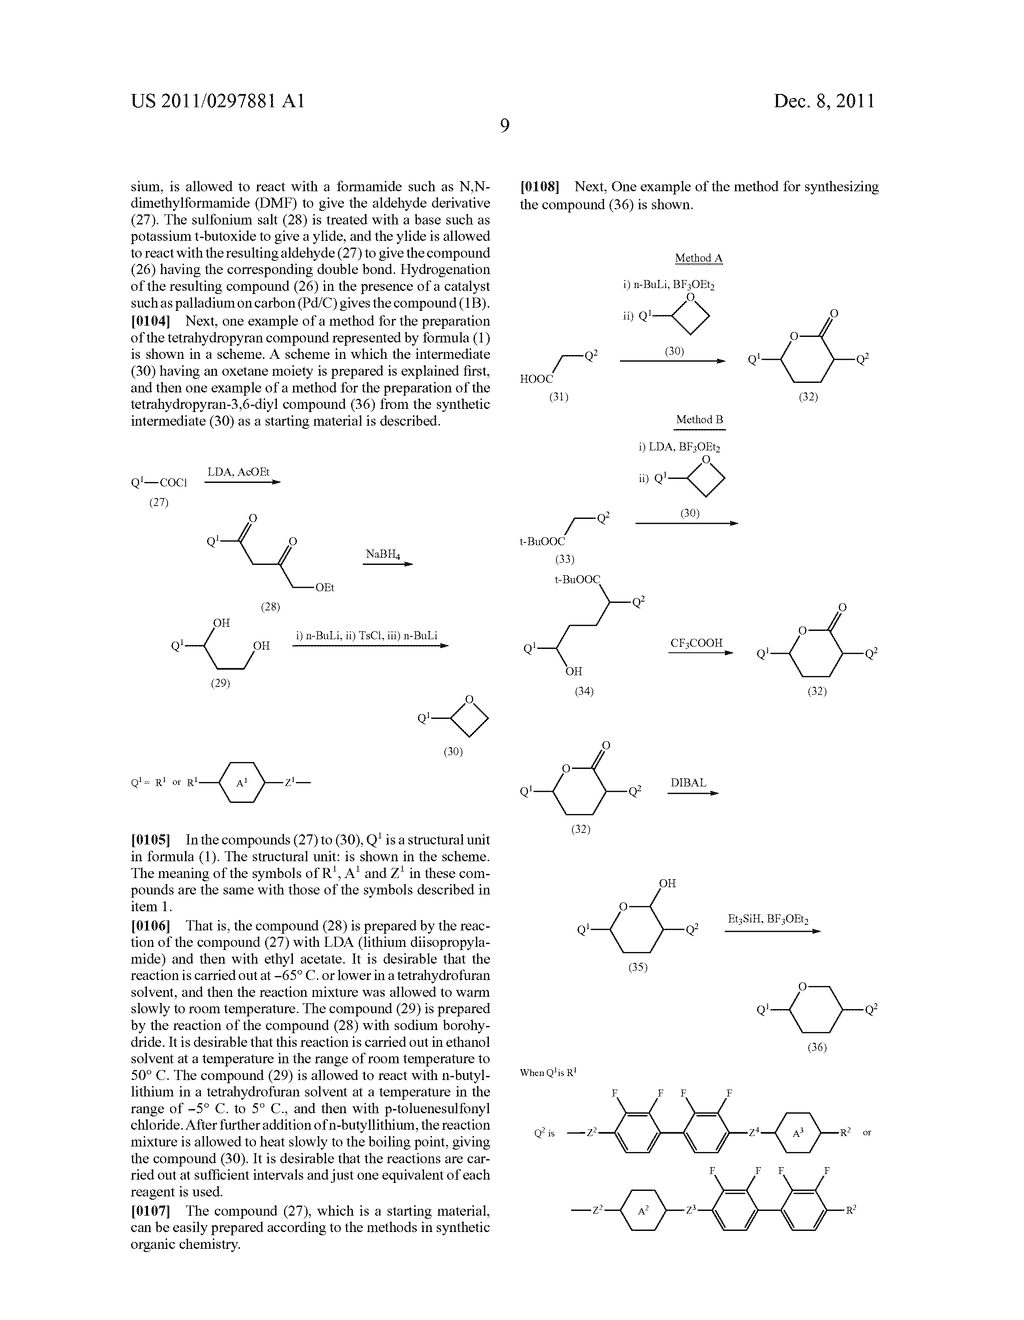 FOUR-RING LIQUID CRYSTAL COMPOUND HAVING TETRAHYDROPYRAN AND     2,2',3,3'-TETRAFLUOROBIPHENYL, LIQUID CRYSTAL COMPOSITION AND LIQUID     CRYSTAL DISPLAY DEVICE - diagram, schematic, and image 10